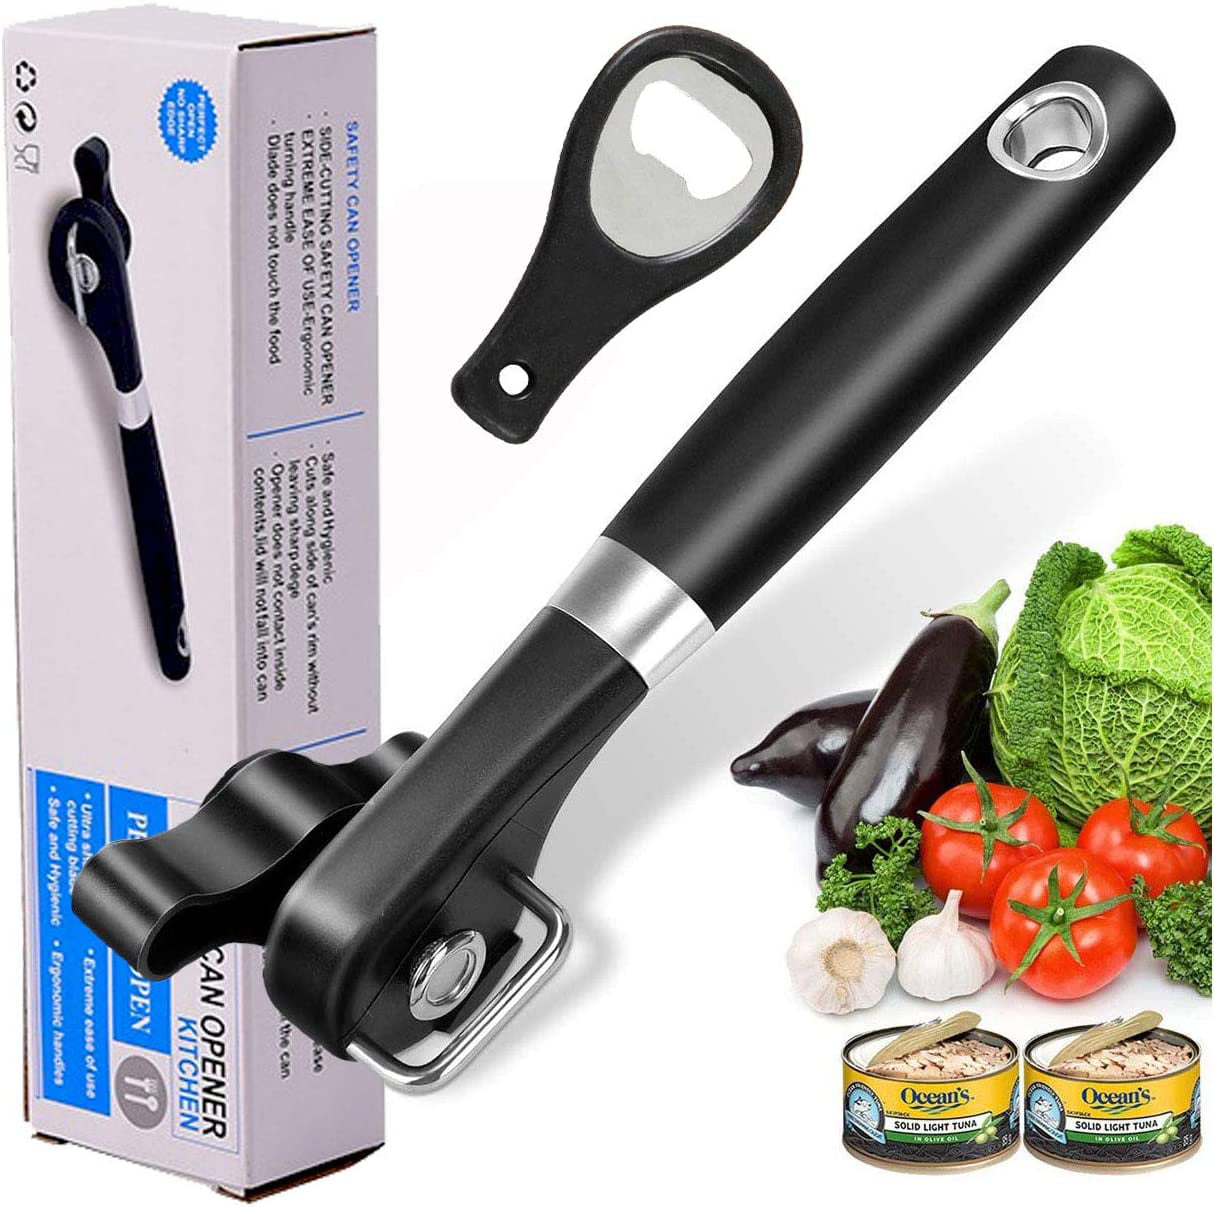 Tall Electric Can Opener Seniors Arthritis Smooth Edge Cooking Home Kitchen Tool 